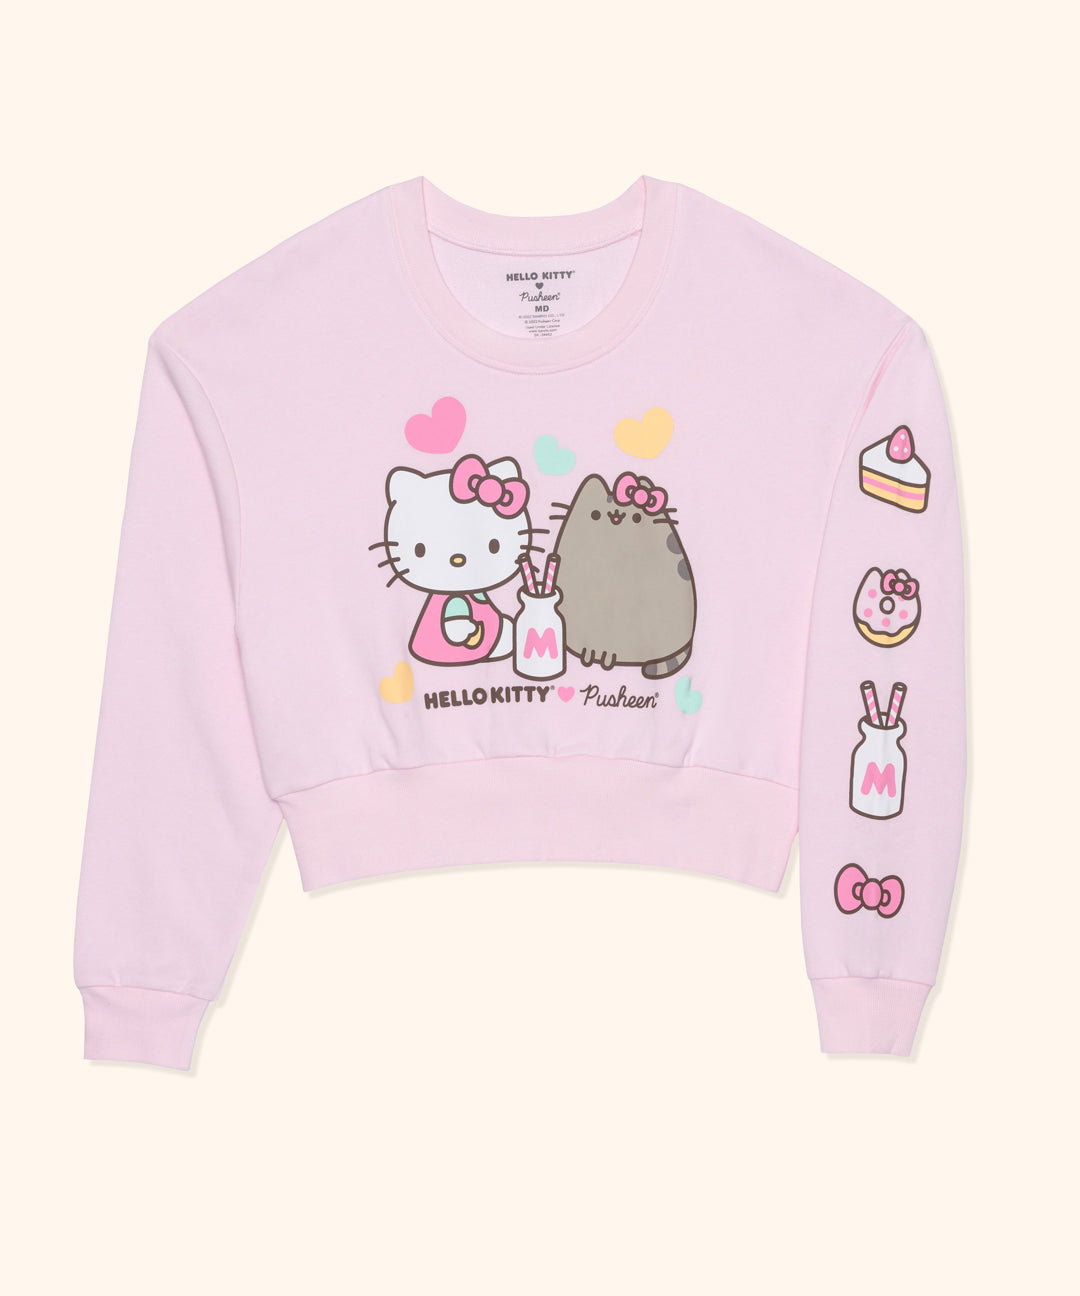 Web design for hello kitty official store